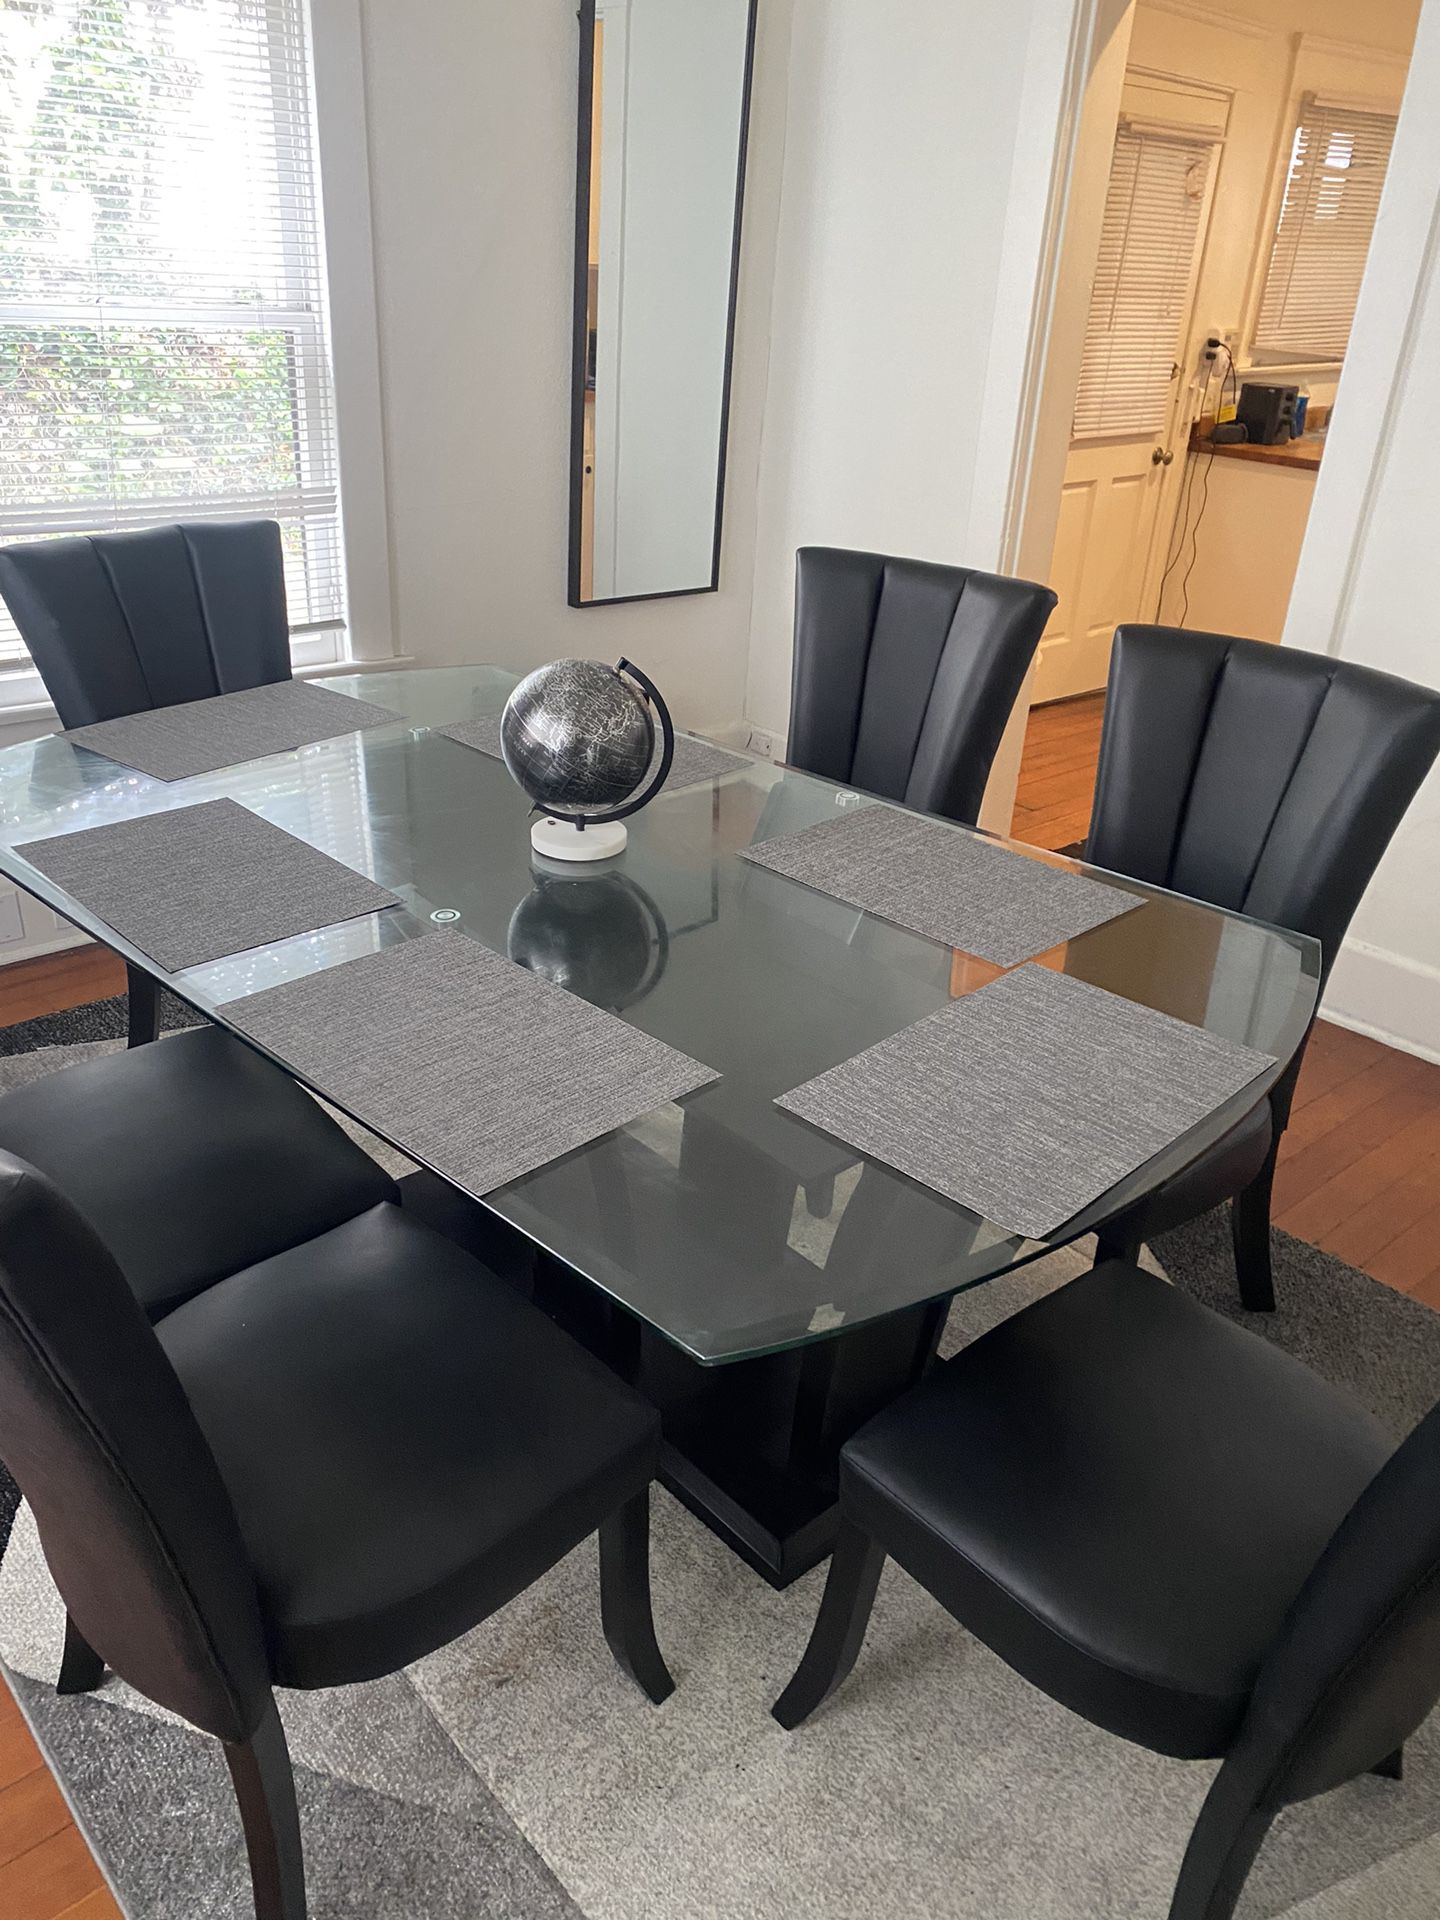 6 piece glass dinning table set, chairs and table squares included